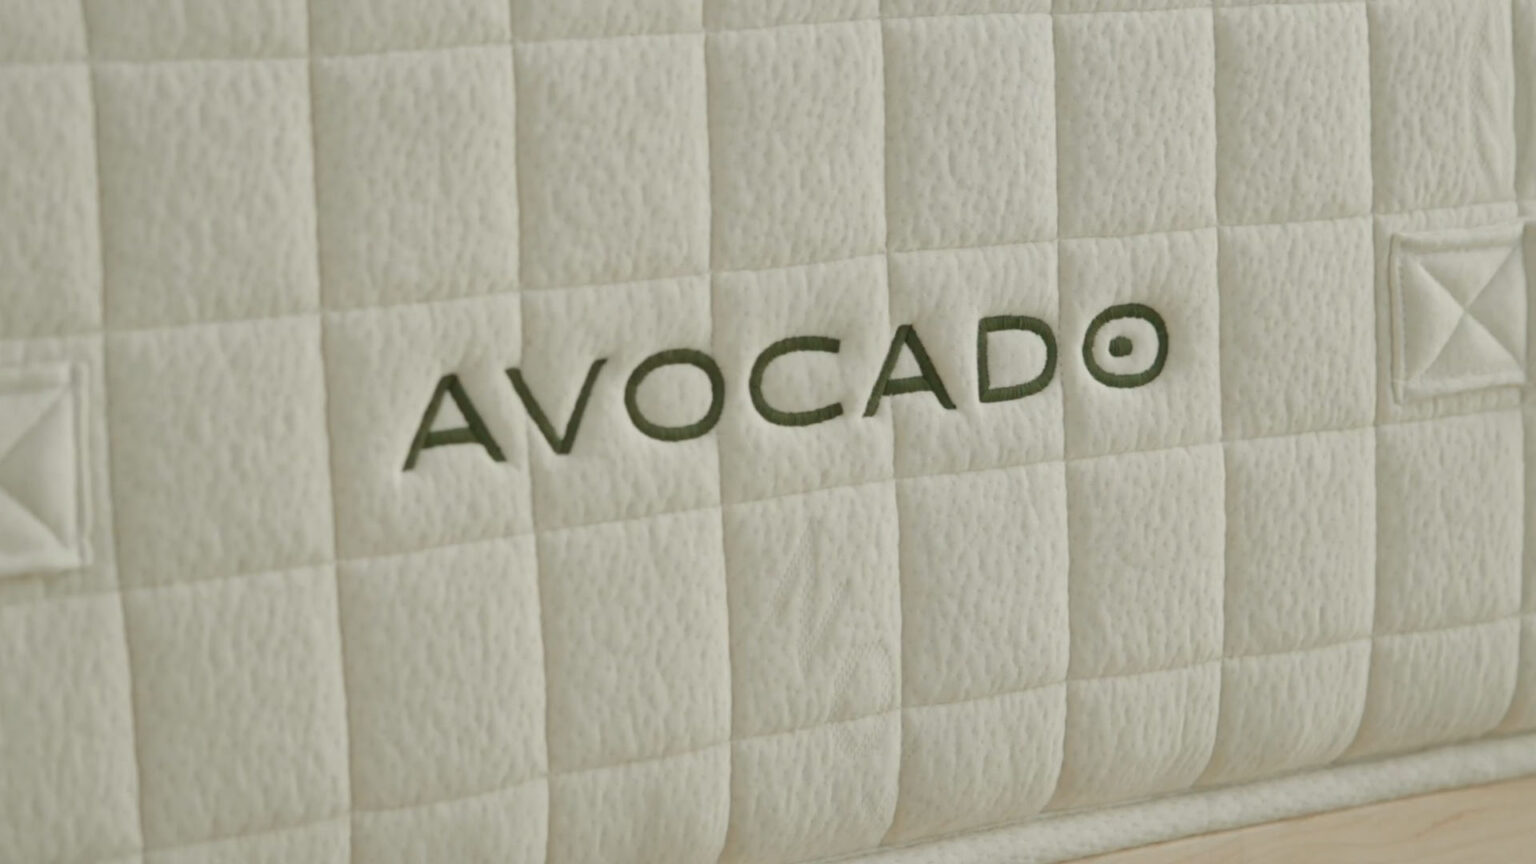 Avocado Mattress delivers to Urbandale